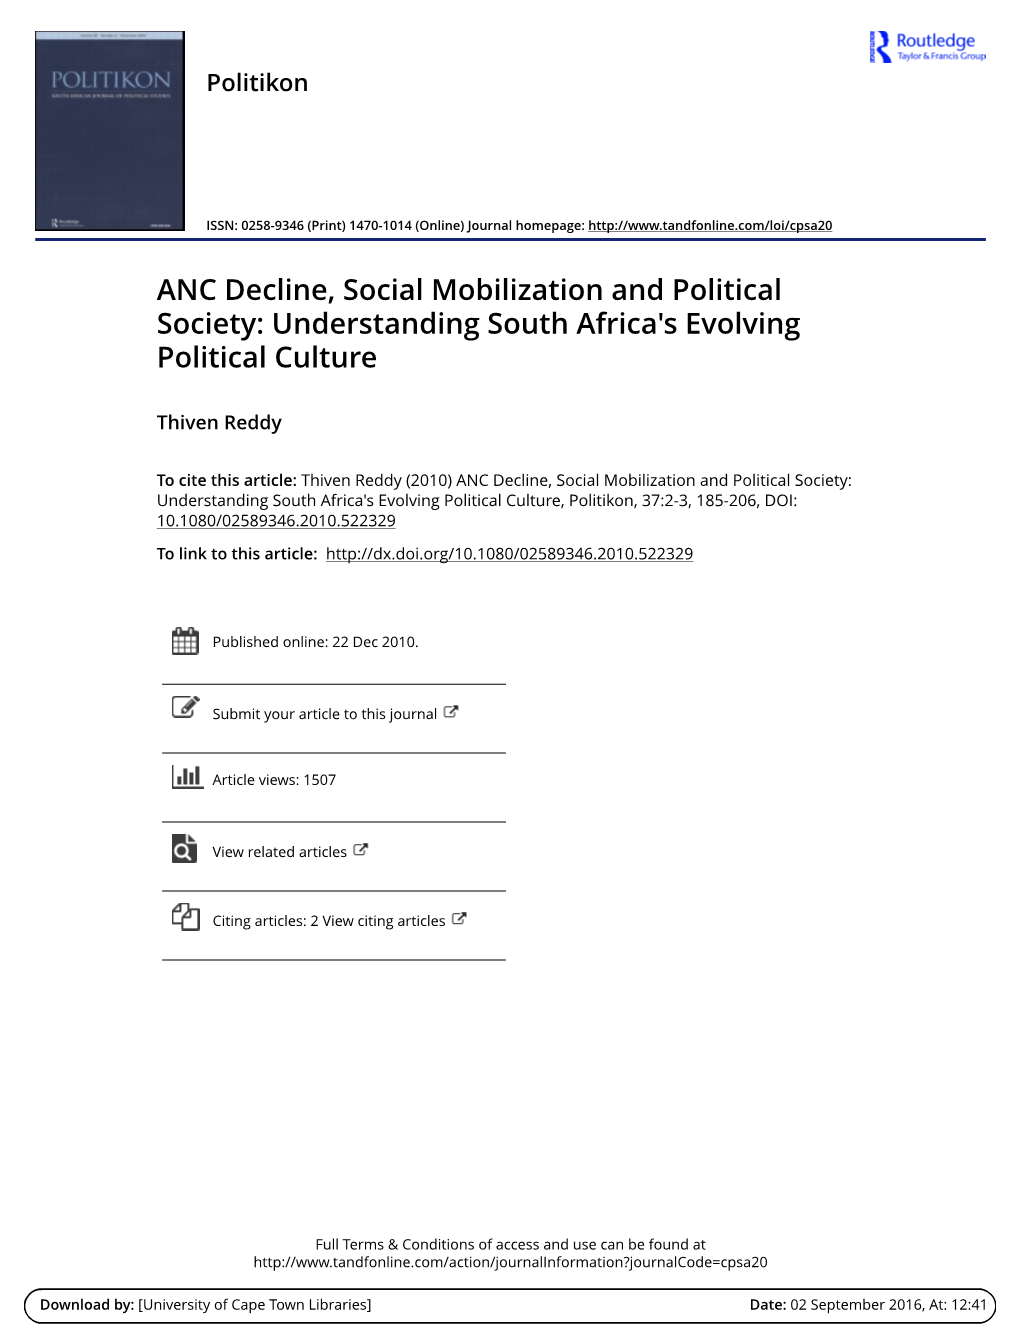 ANC Decline, Social Mobilization and Political Society: Understanding South Africa's Evolving Political Culture